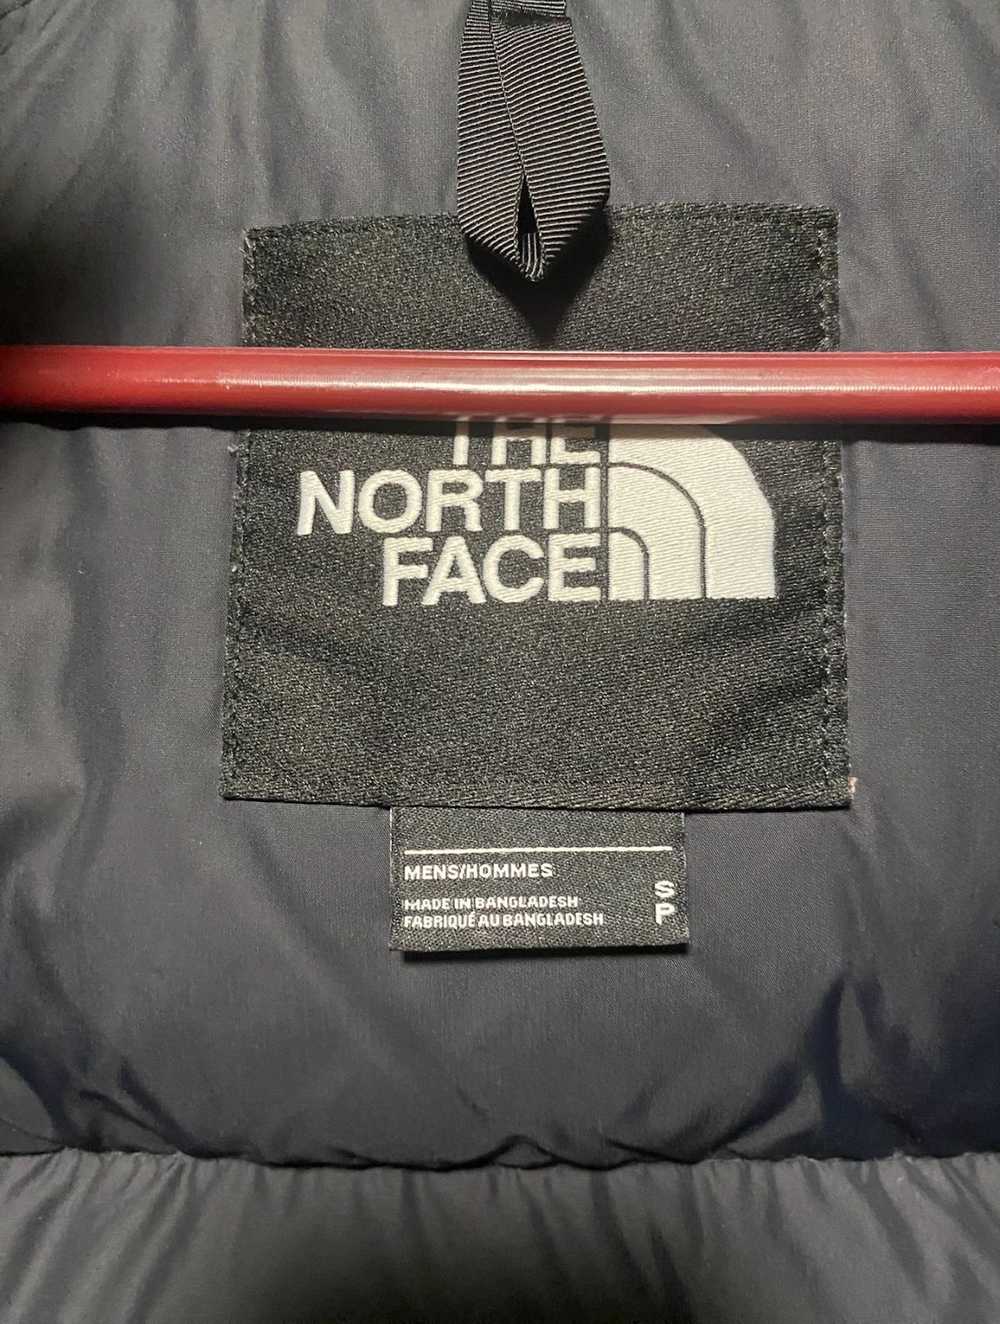 The North Face The North Face - image 6